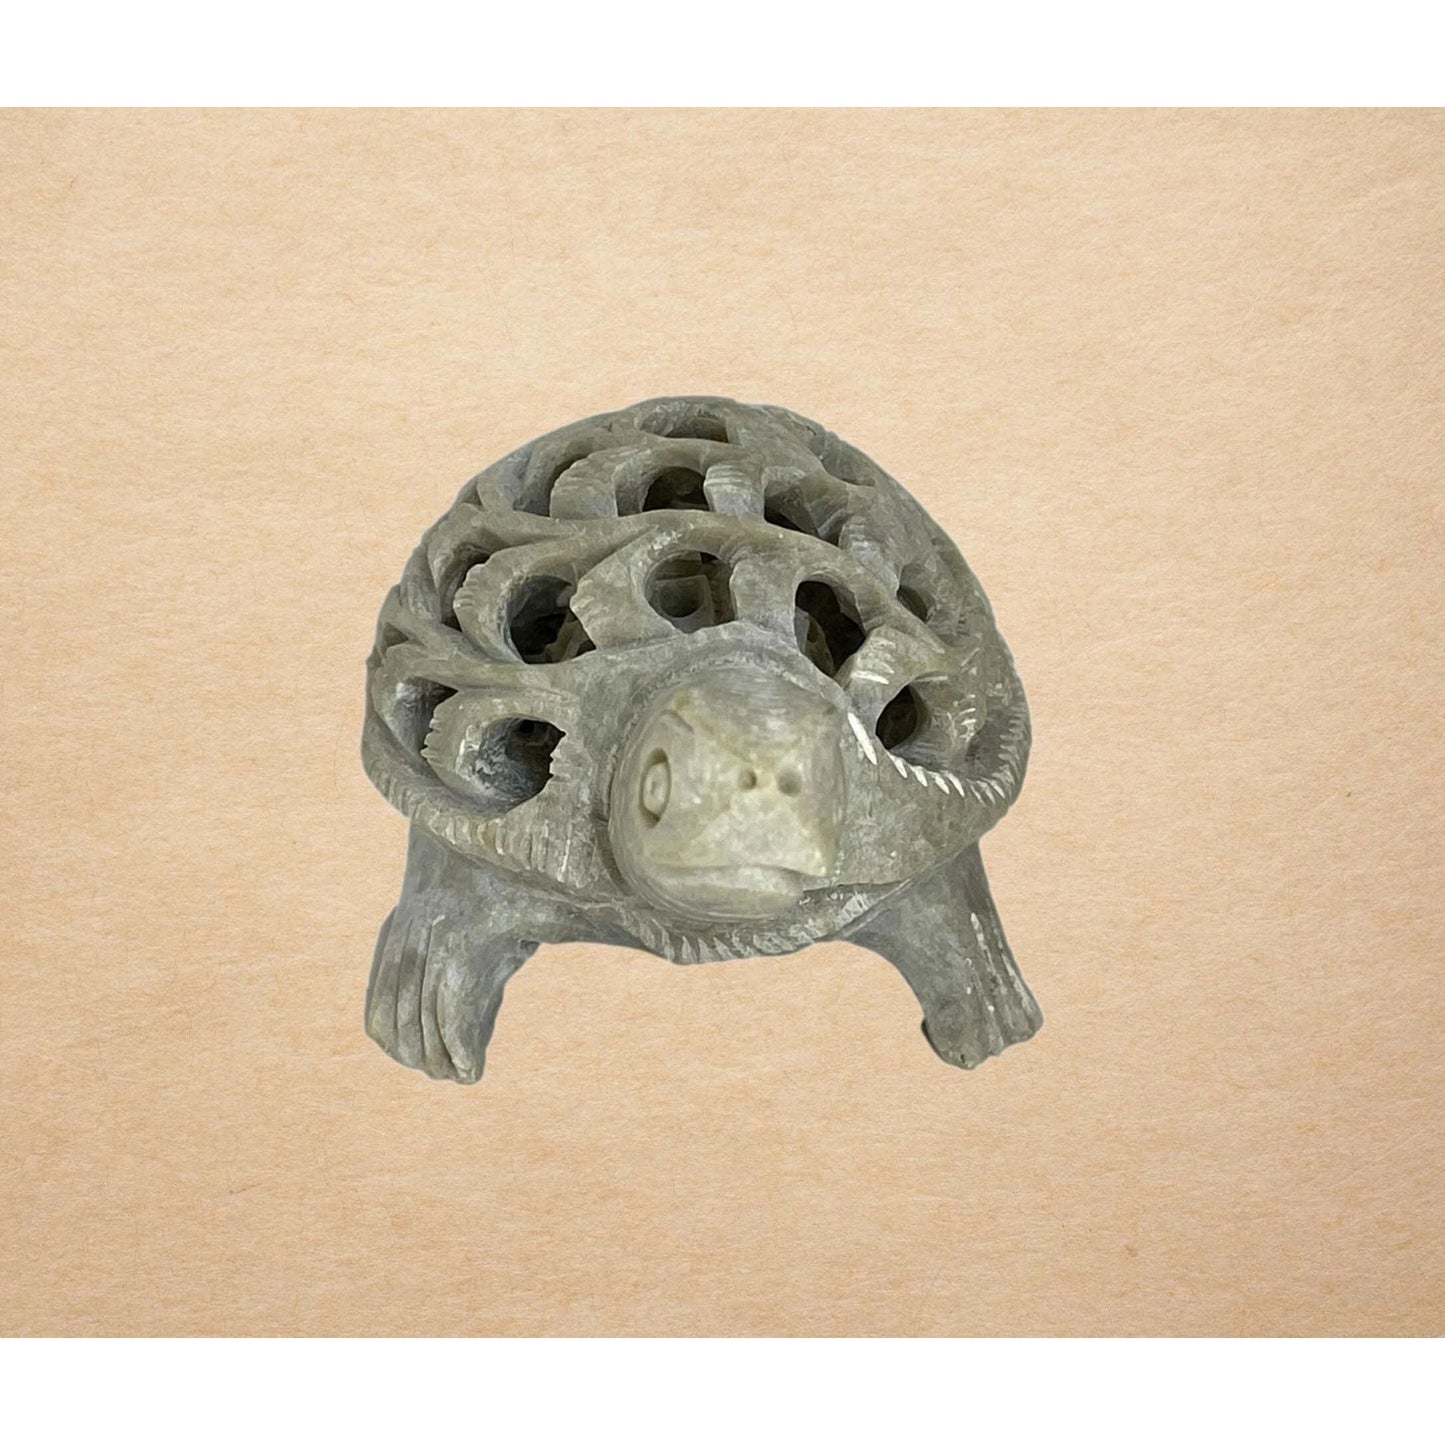 Soap Stone Craved Turtle with Baby Turtle Inside Sculpture